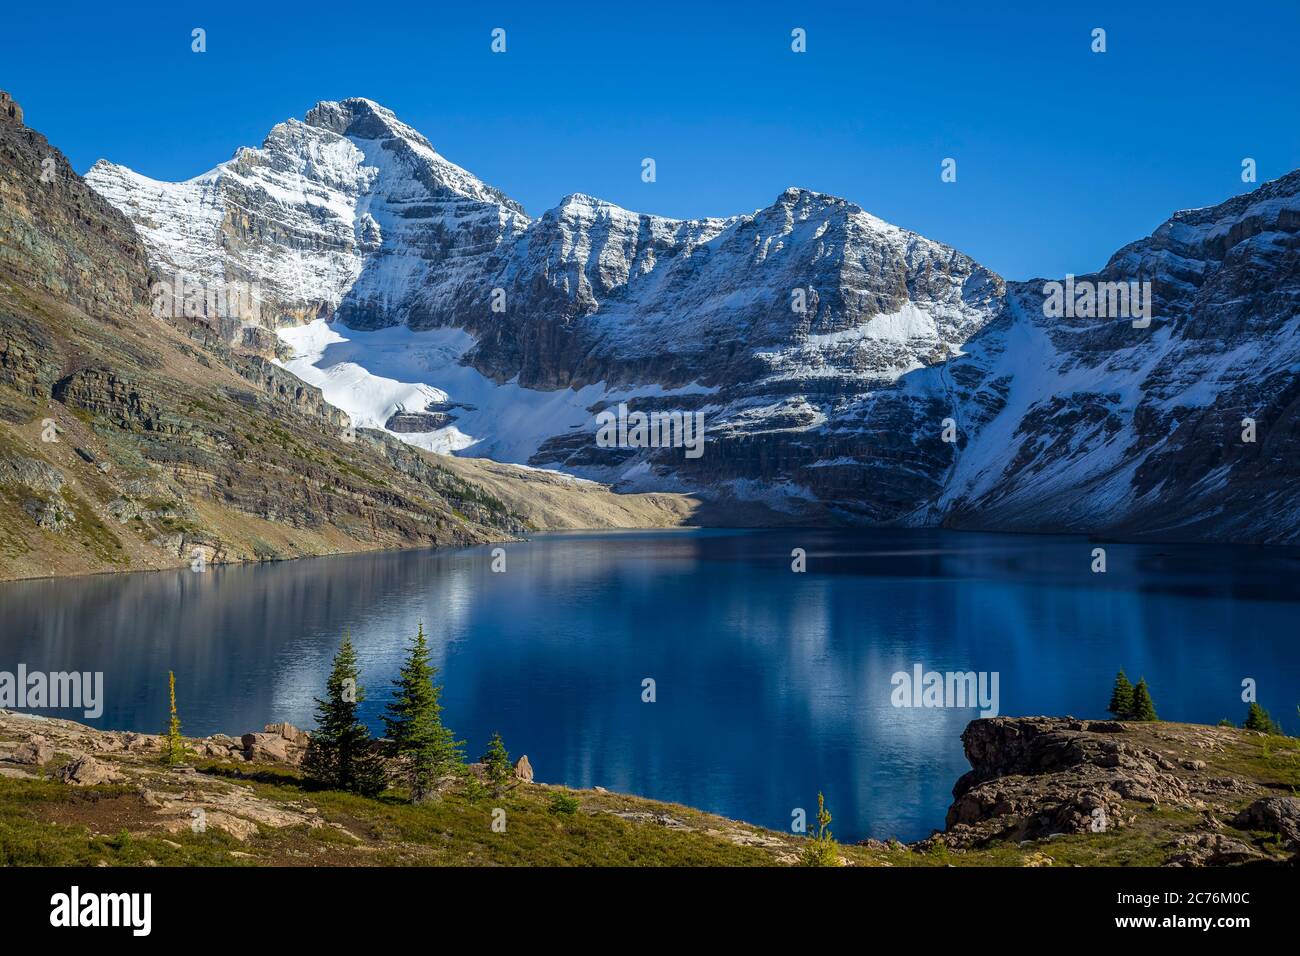 Canadian Rockies landscape of a blue lake surrounded by mountains with snow during autumn, Lake McArthur, Yoho National Park, British Columbia, Canada Stock Photo